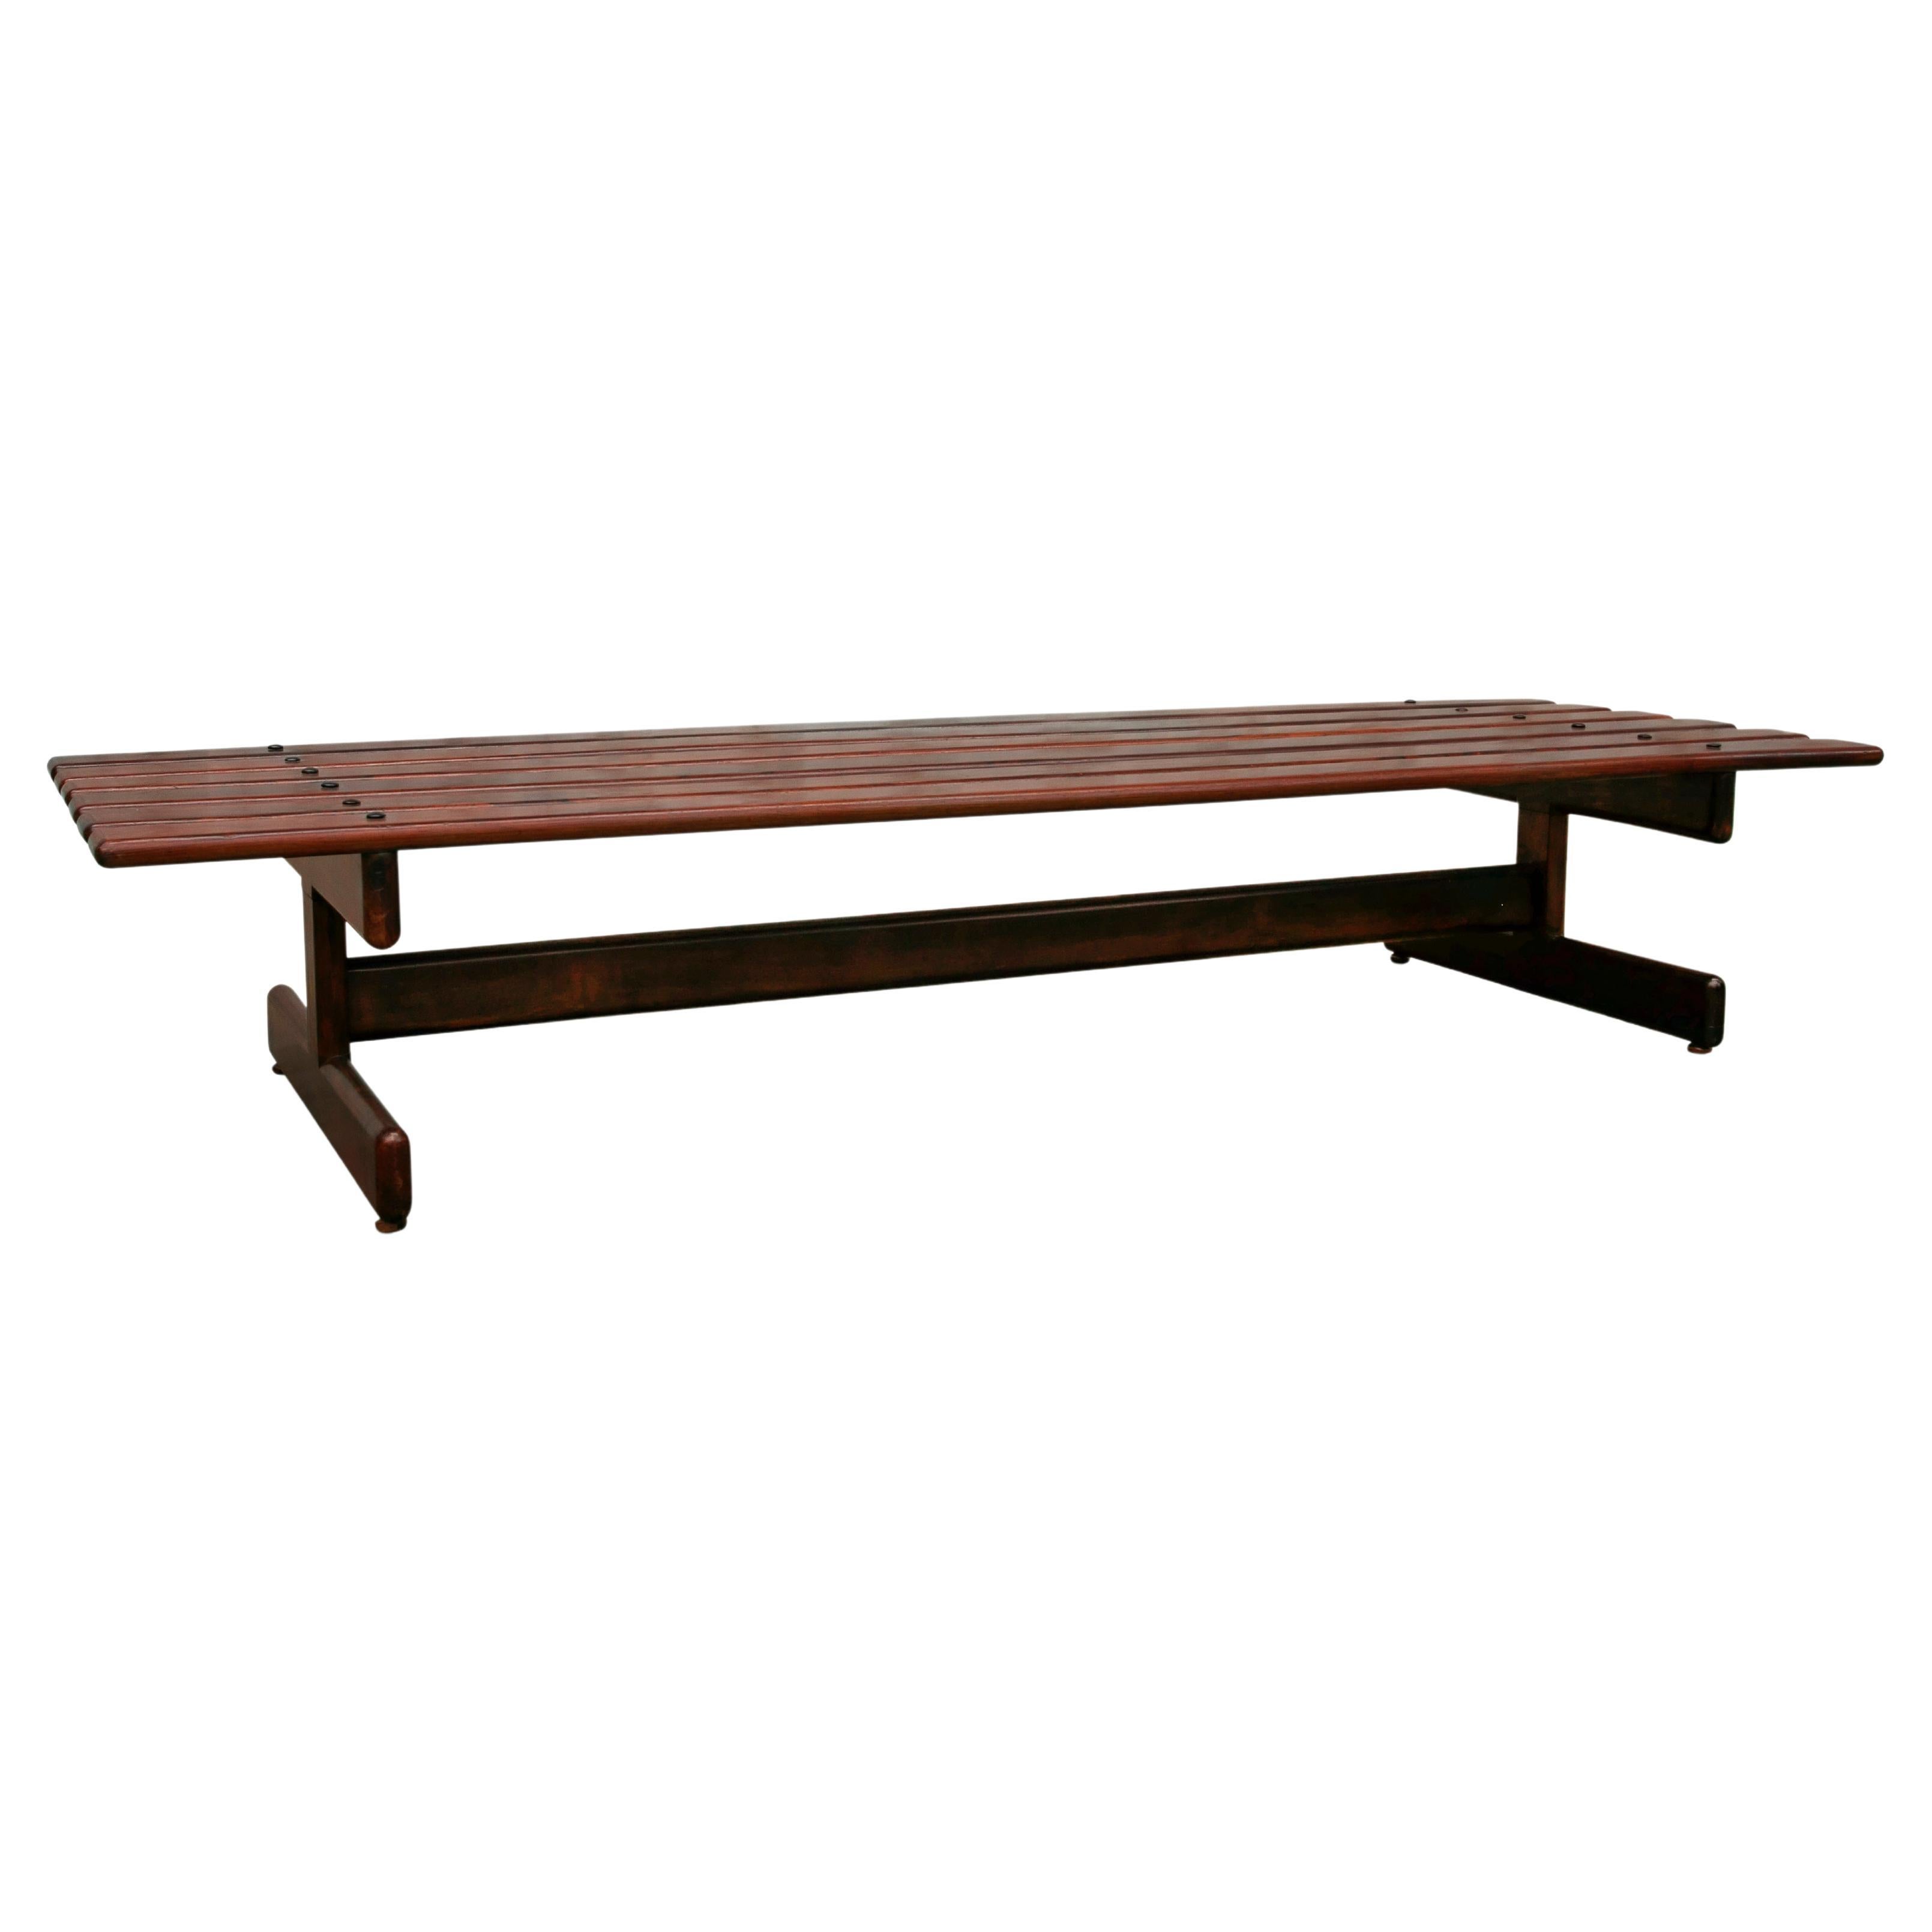 1960s Brazilian Modern Bench in Hardwood by Jorge Jabour Mauad for Móveis Cantu For Sale